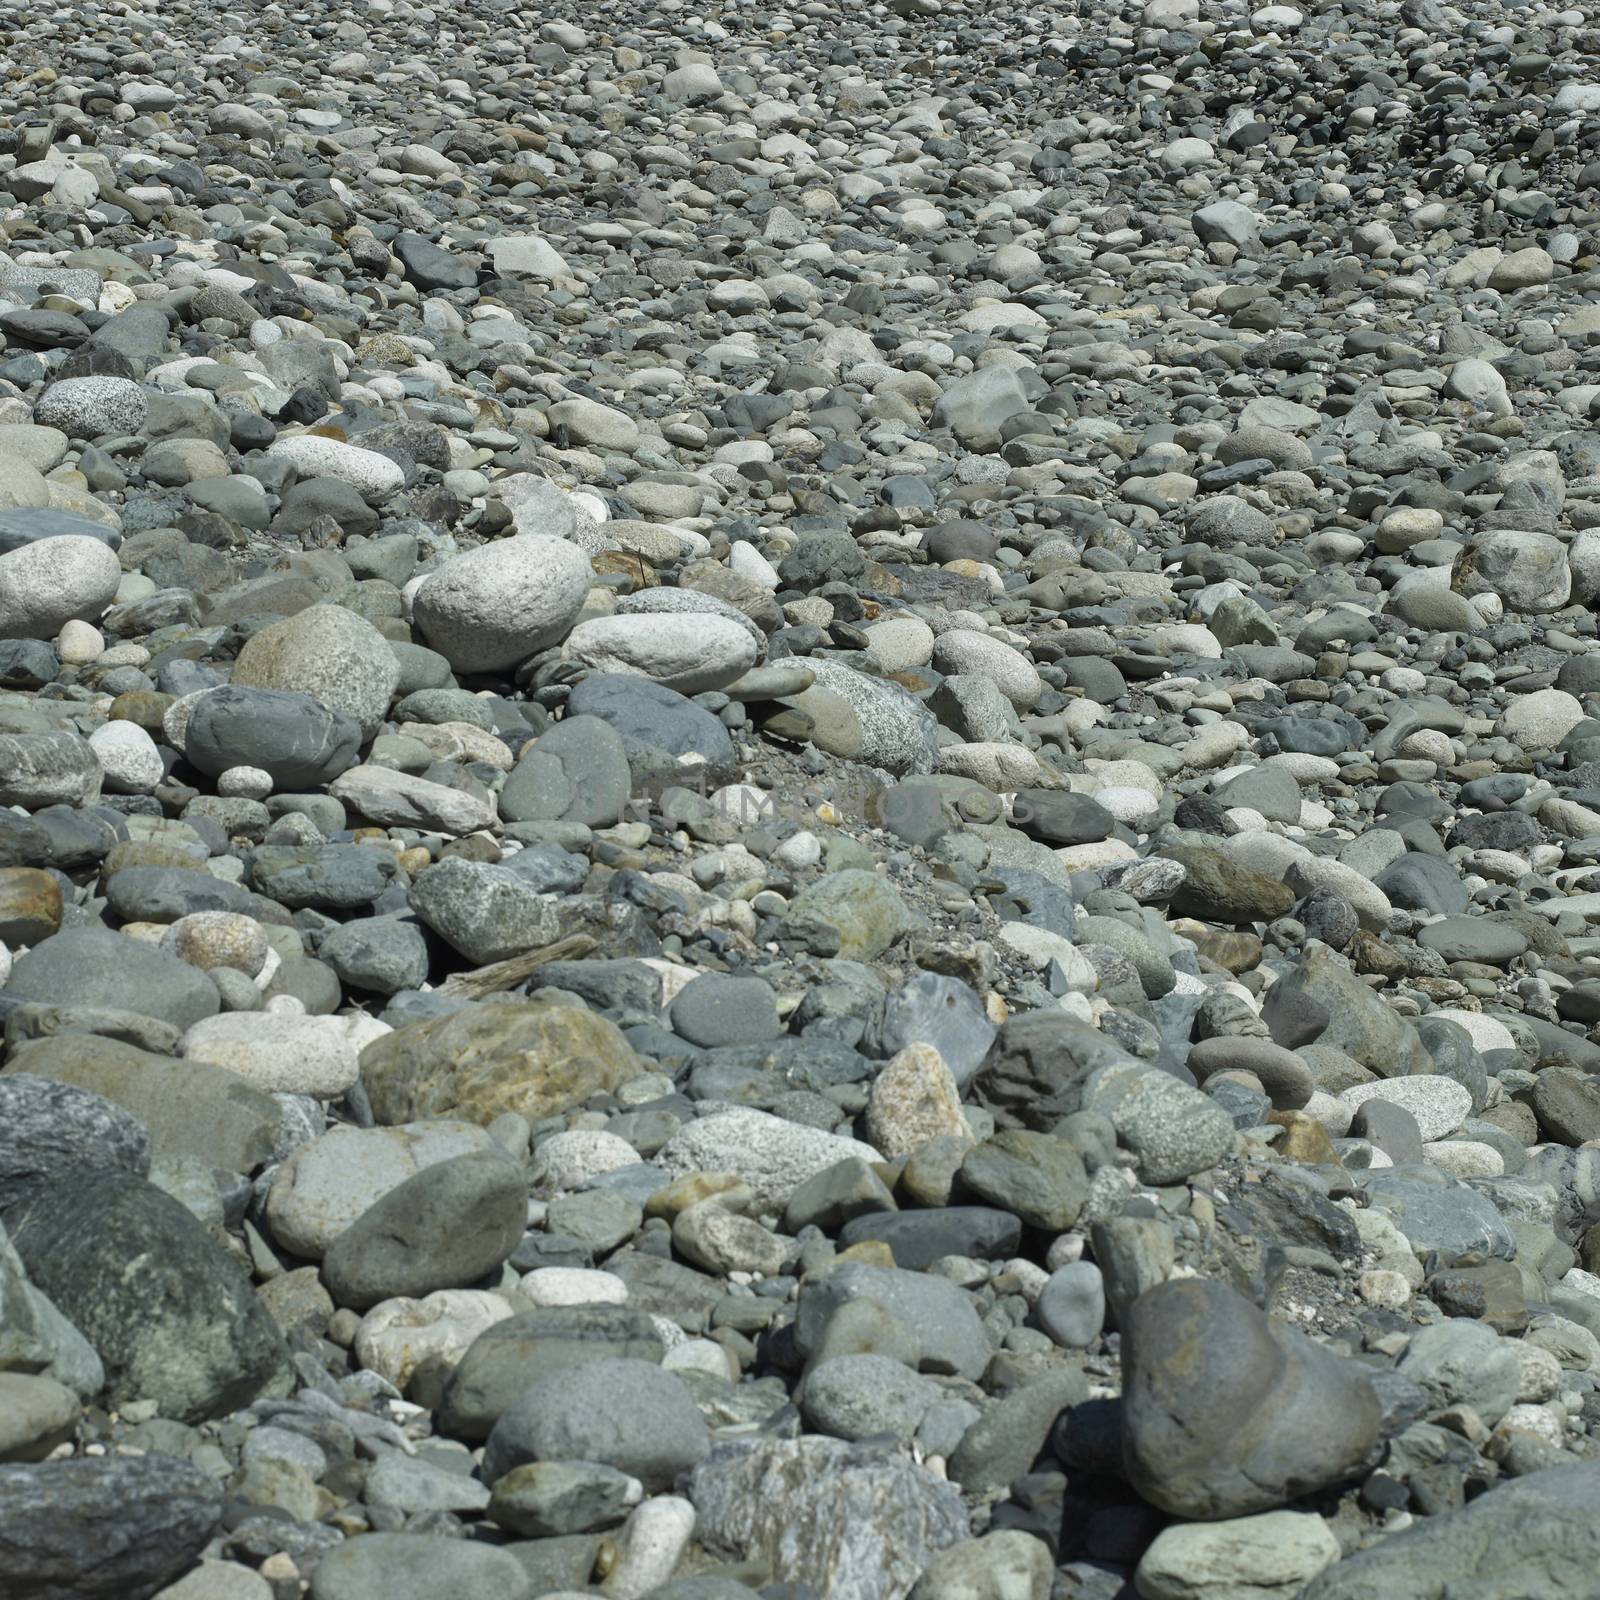 Numerous sizes of grey rocks and pebbles